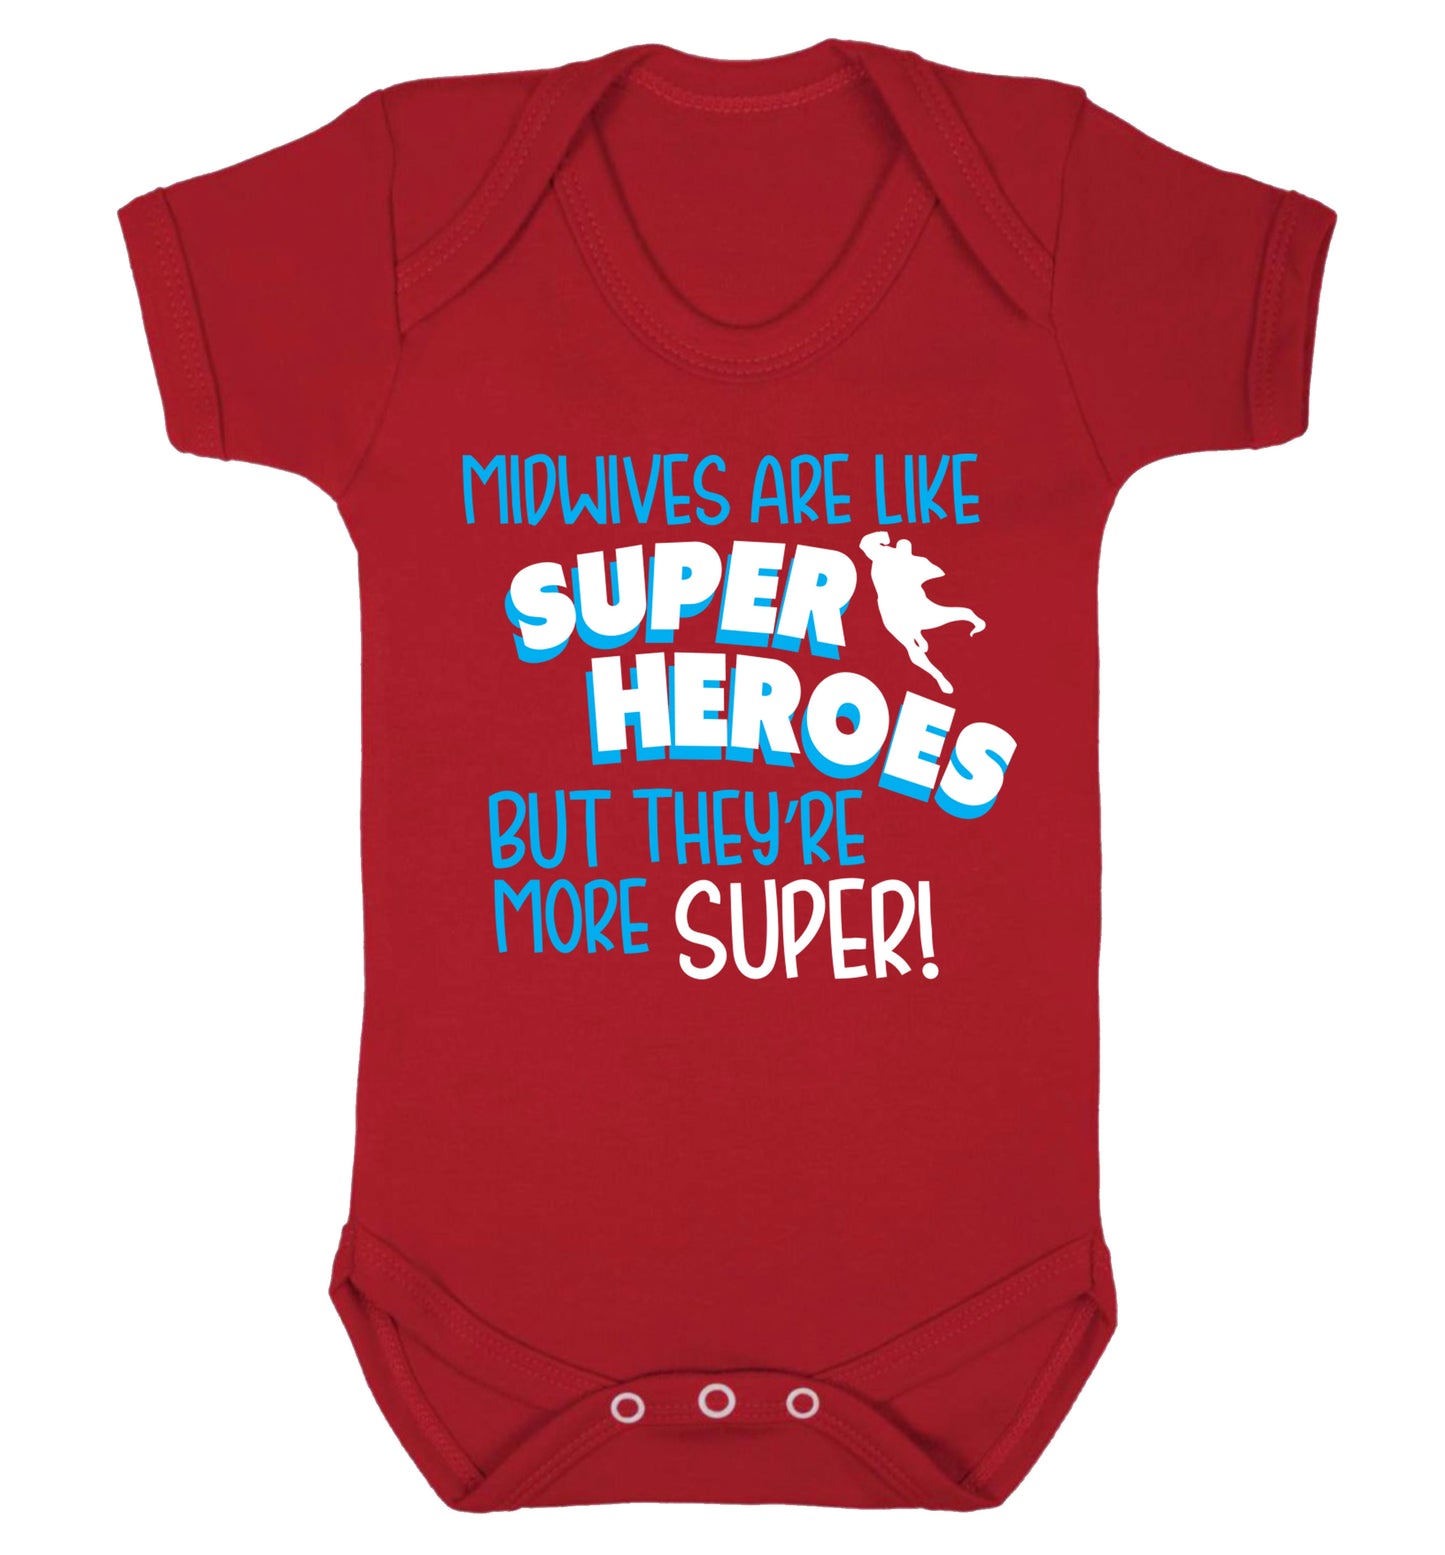 Midwives are like superheros but they're more super Baby Vest red 18-24 months